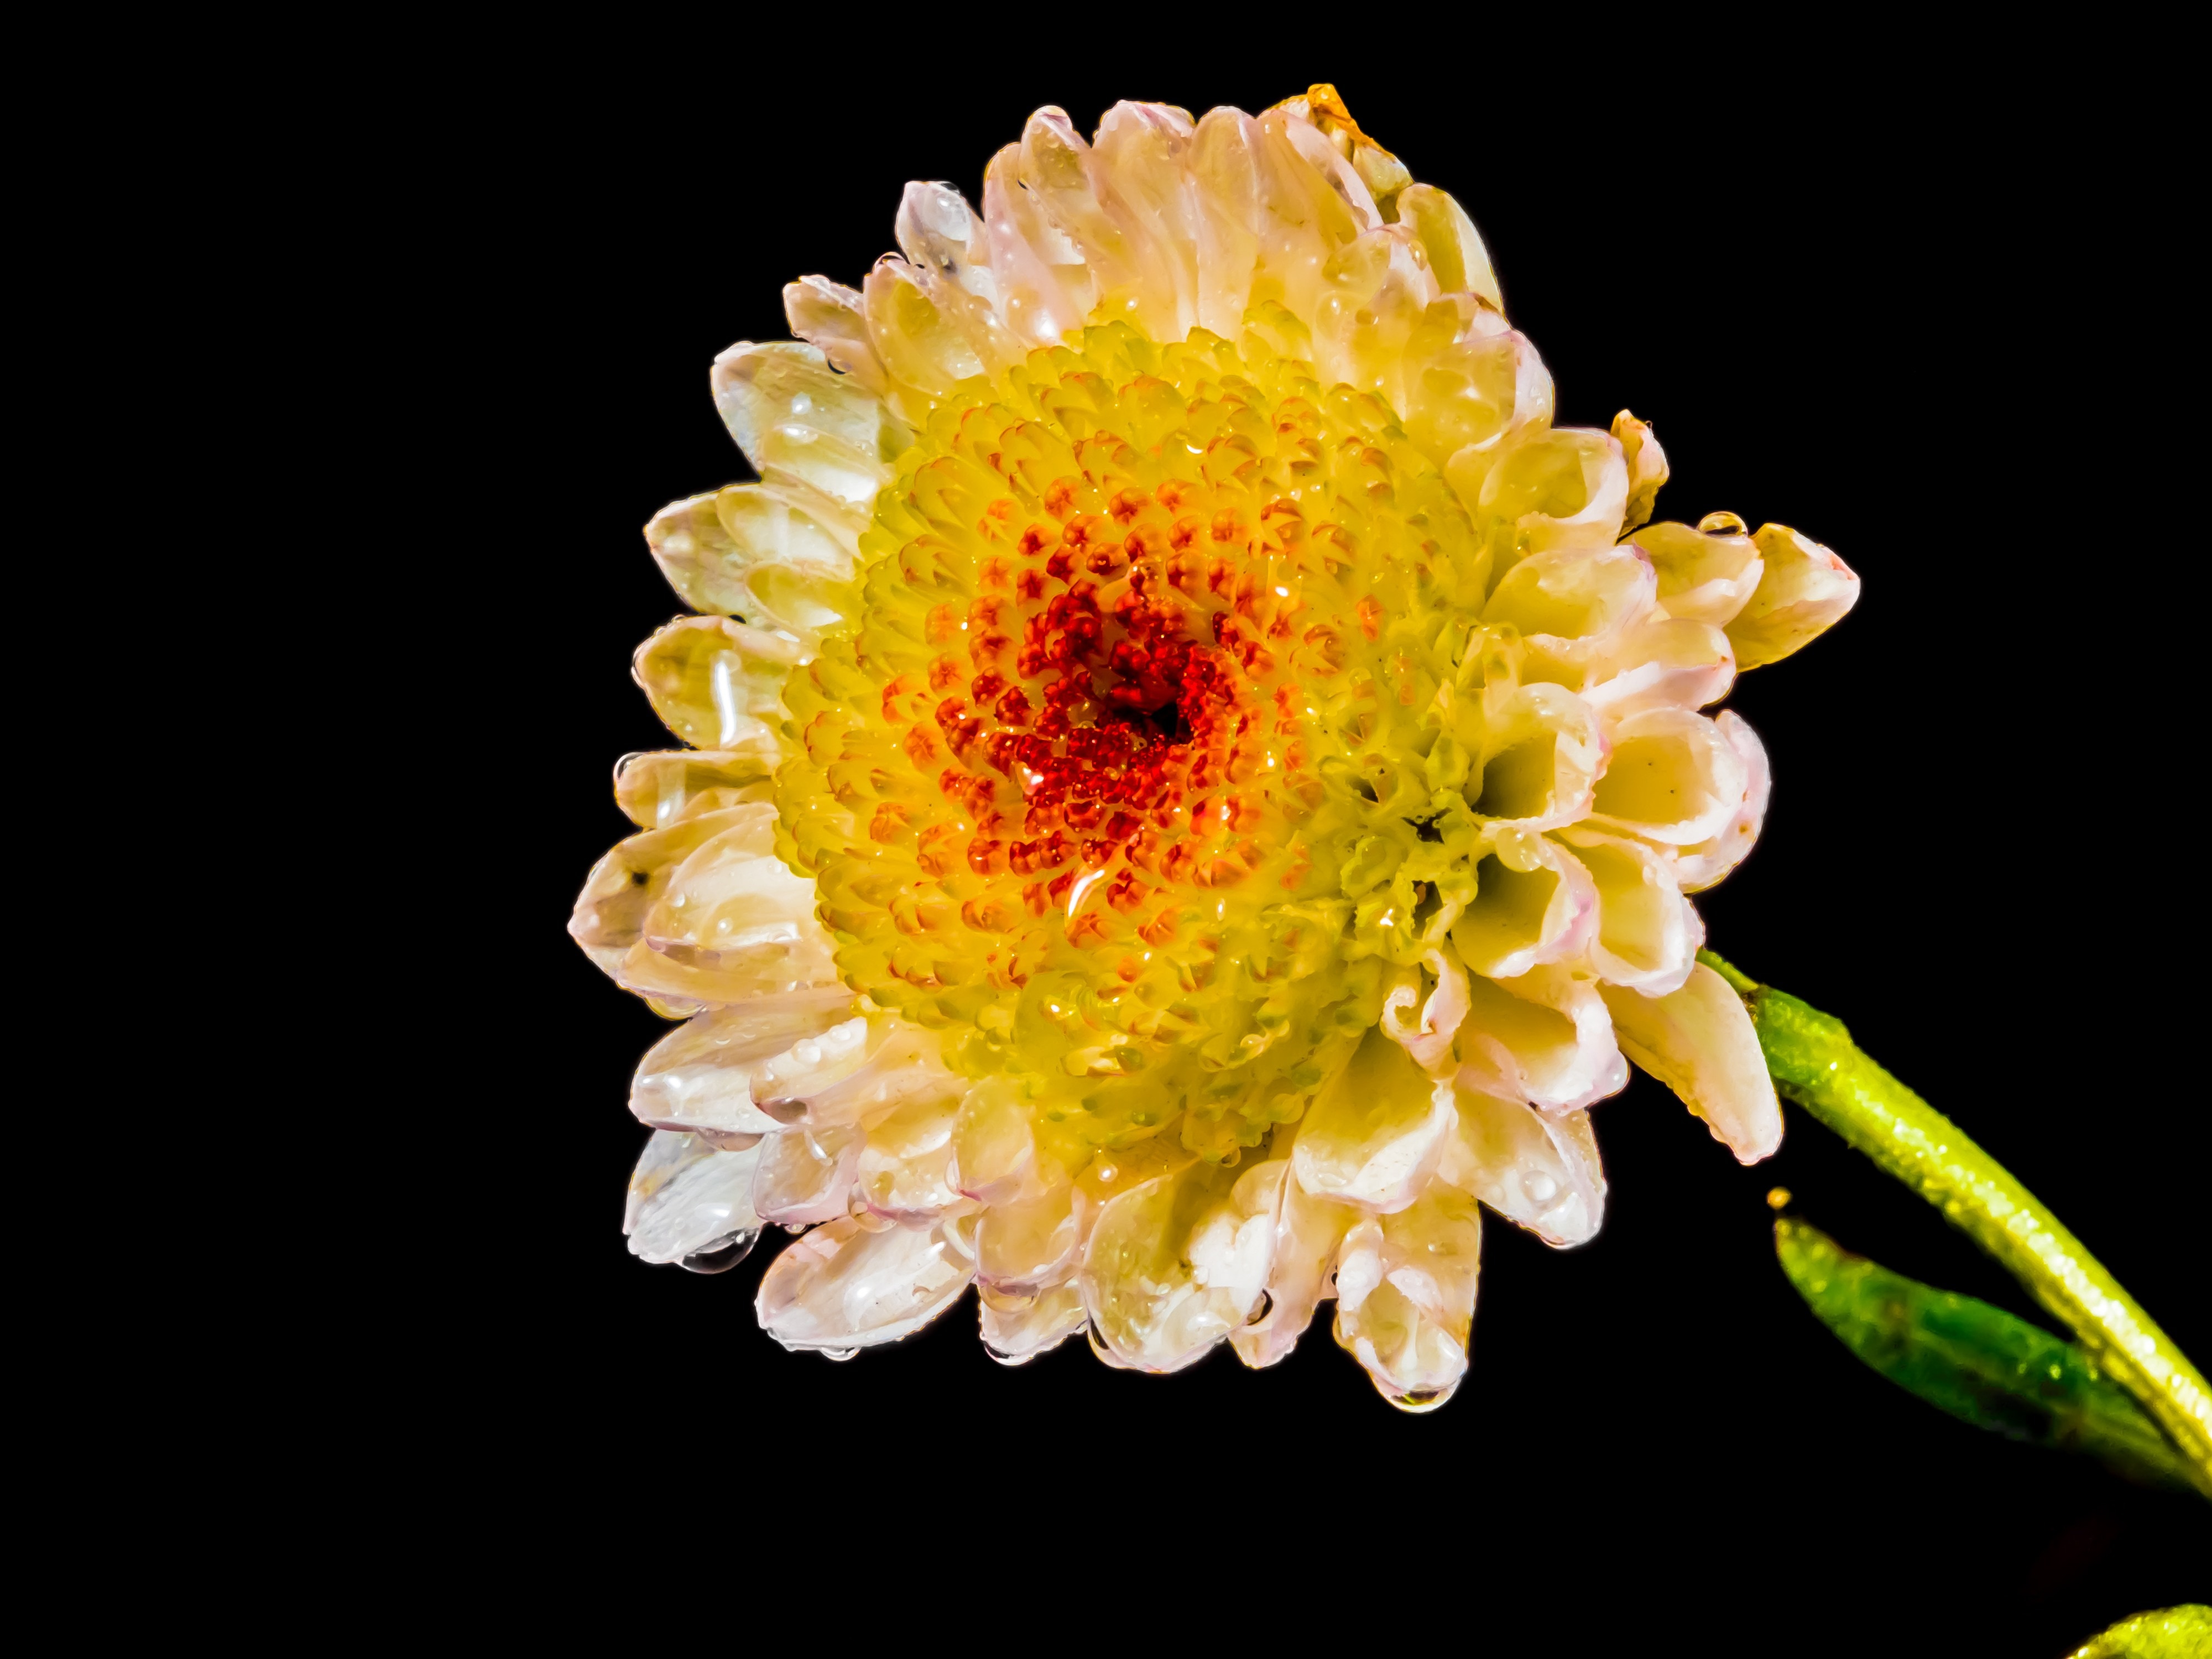 Blossom, Bloom, Flower, White Yellow Red, black background, yellow